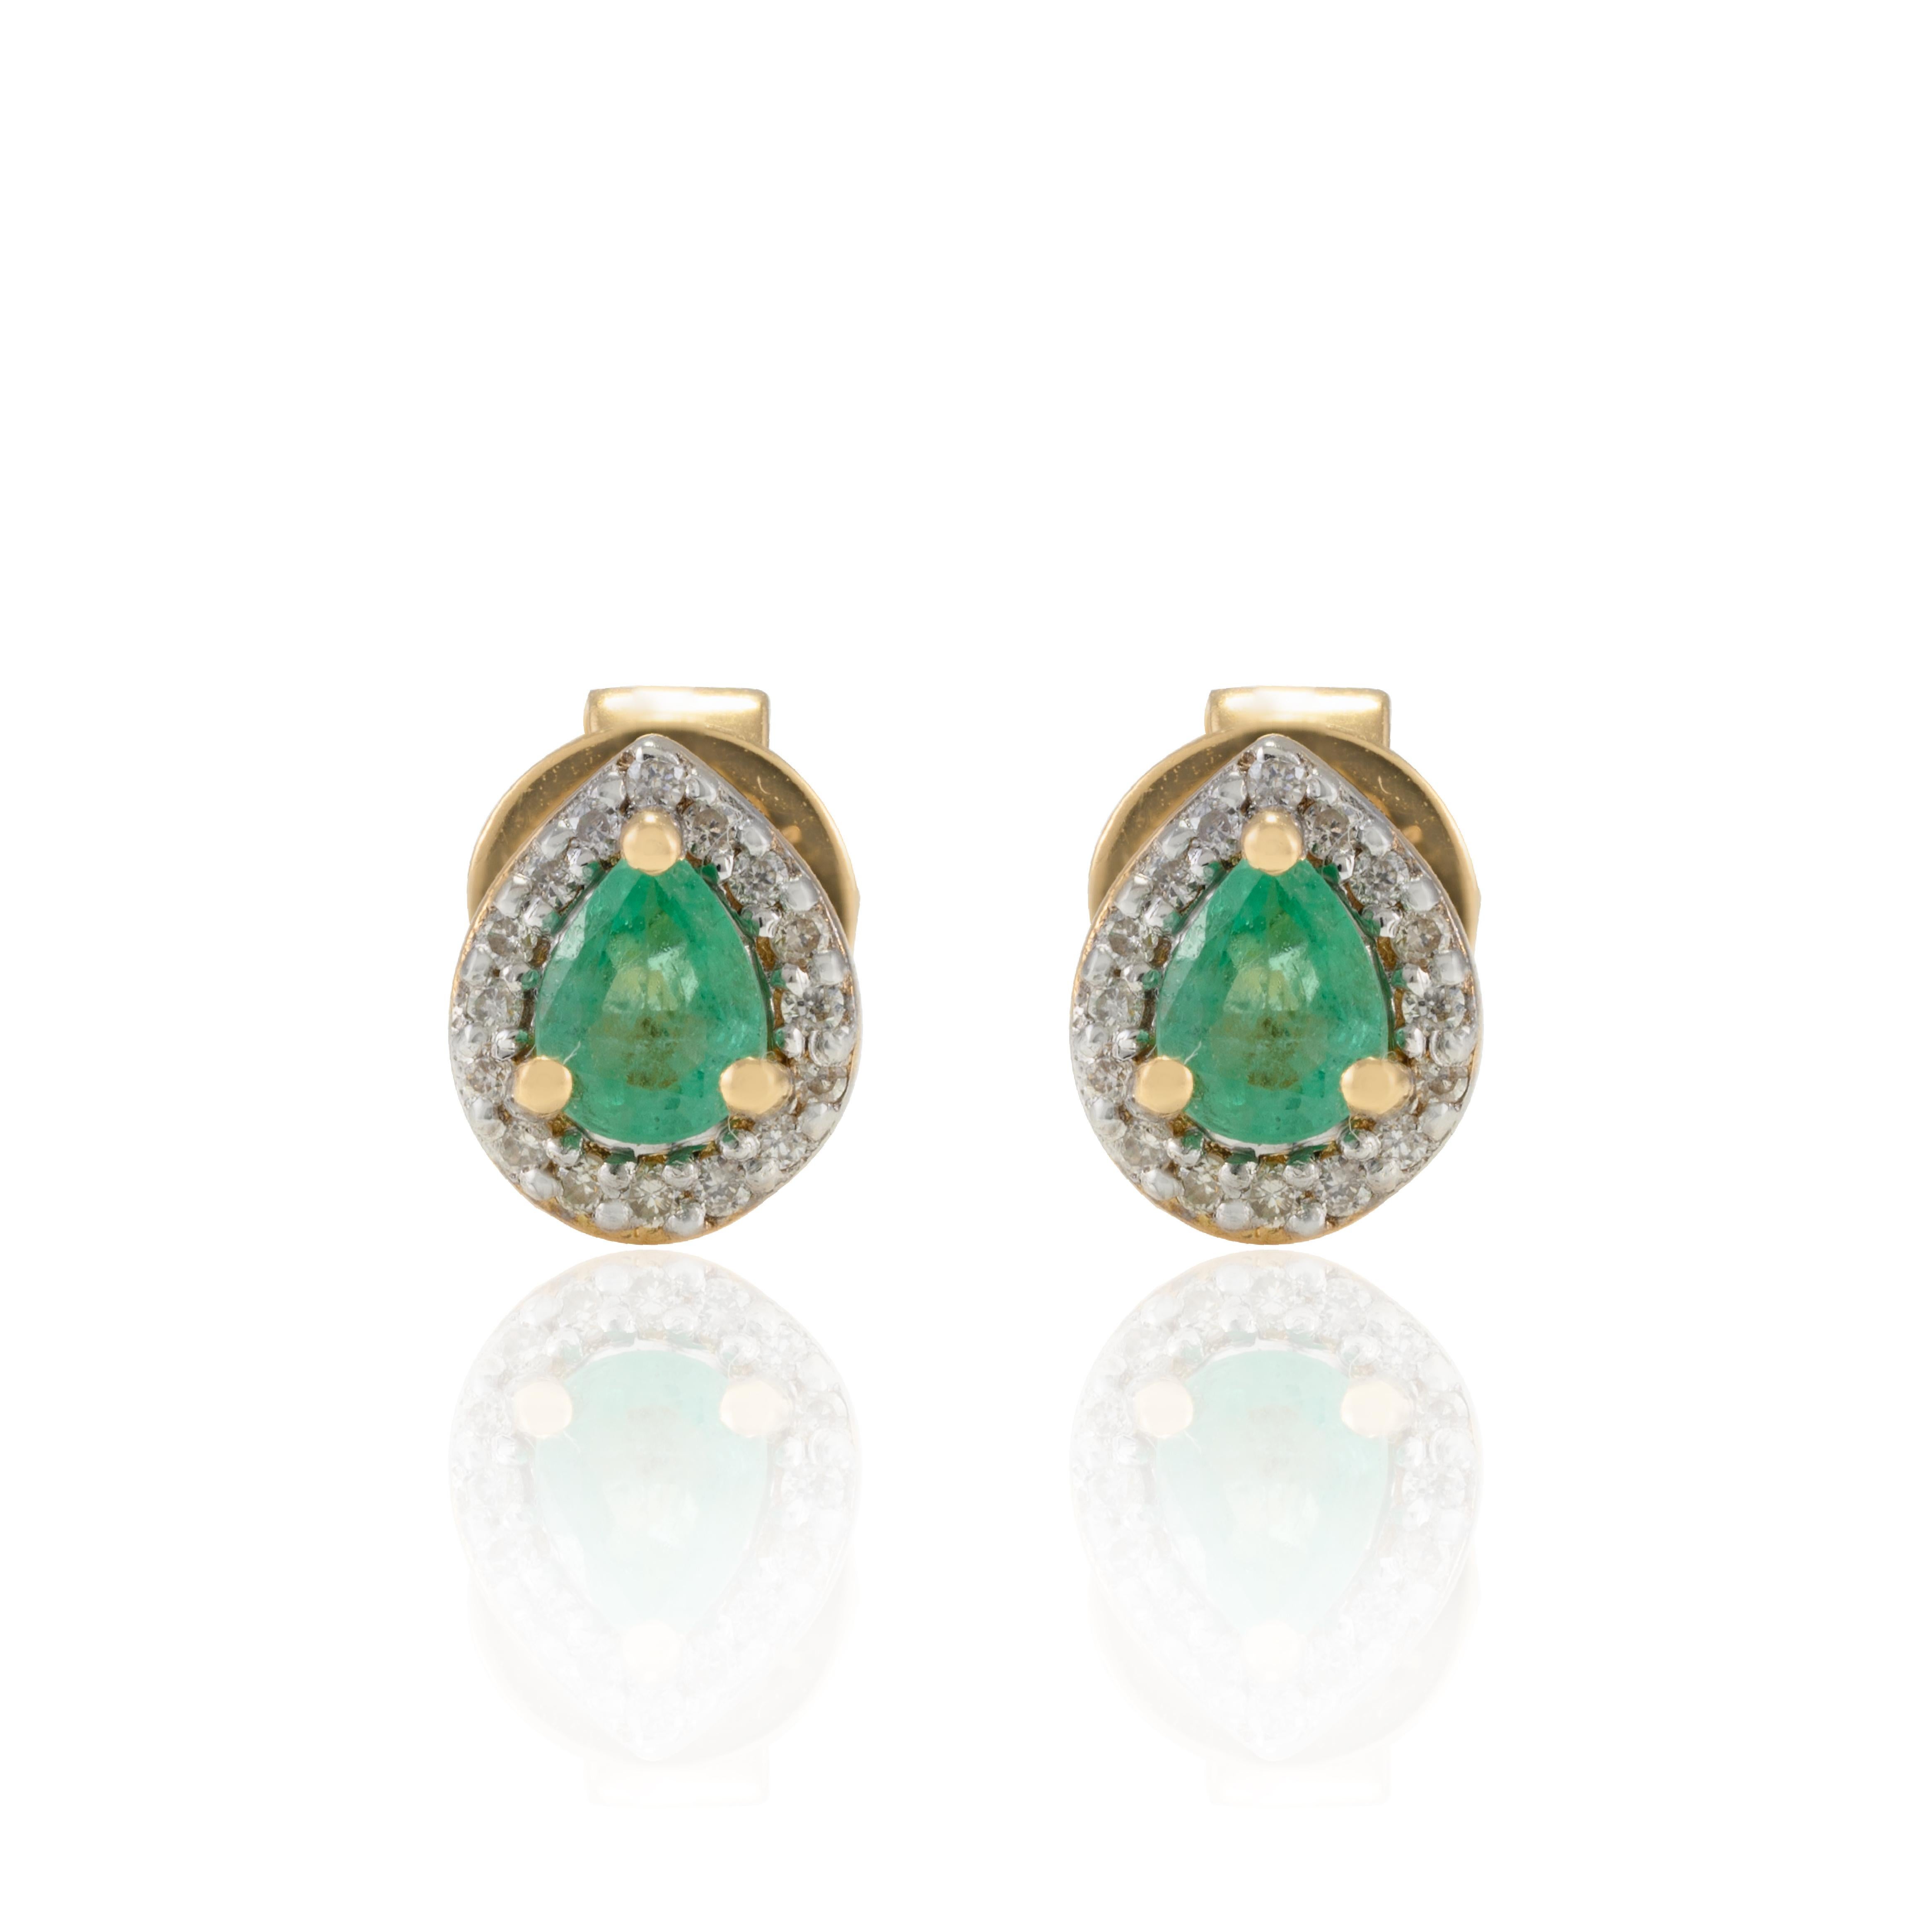 Dainty Pear Emerald Halo Diamond Everyday Stud Earrings in 18K Gold to make a statement with your look. You shall need stud earrings to make a statement with your look. These earrings create a sparkling, luxurious look featuring pear cut